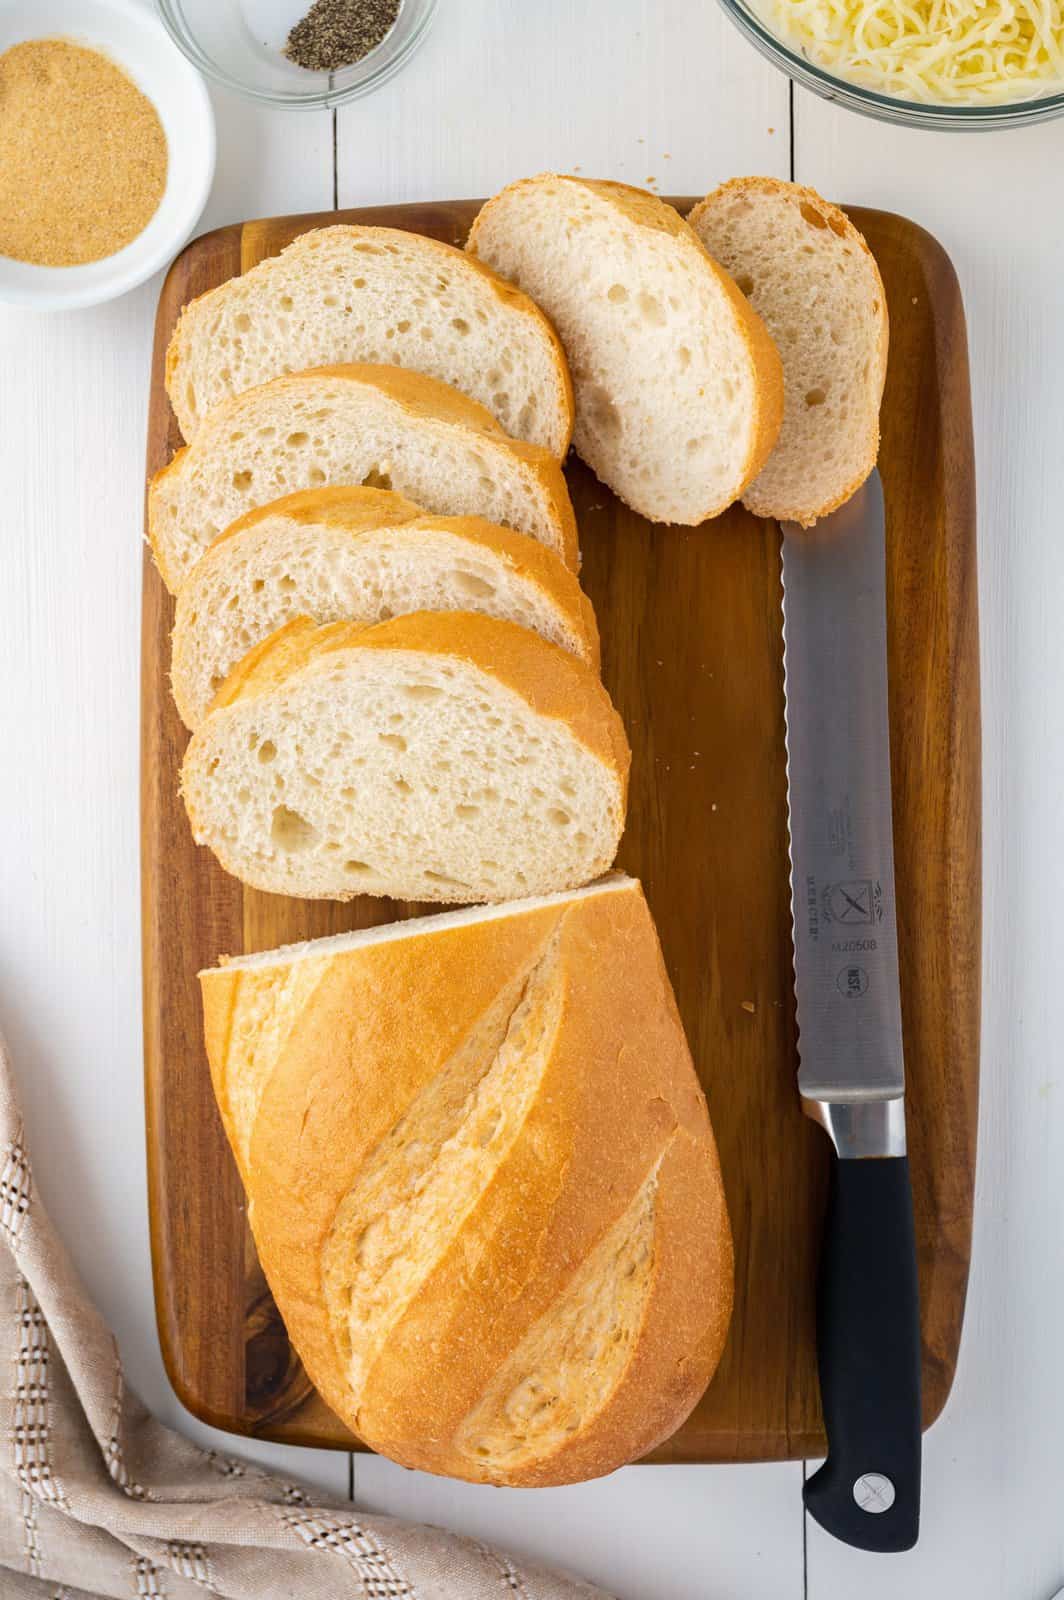 A cutting board with a half sliced loaf of bread and a bread knife.